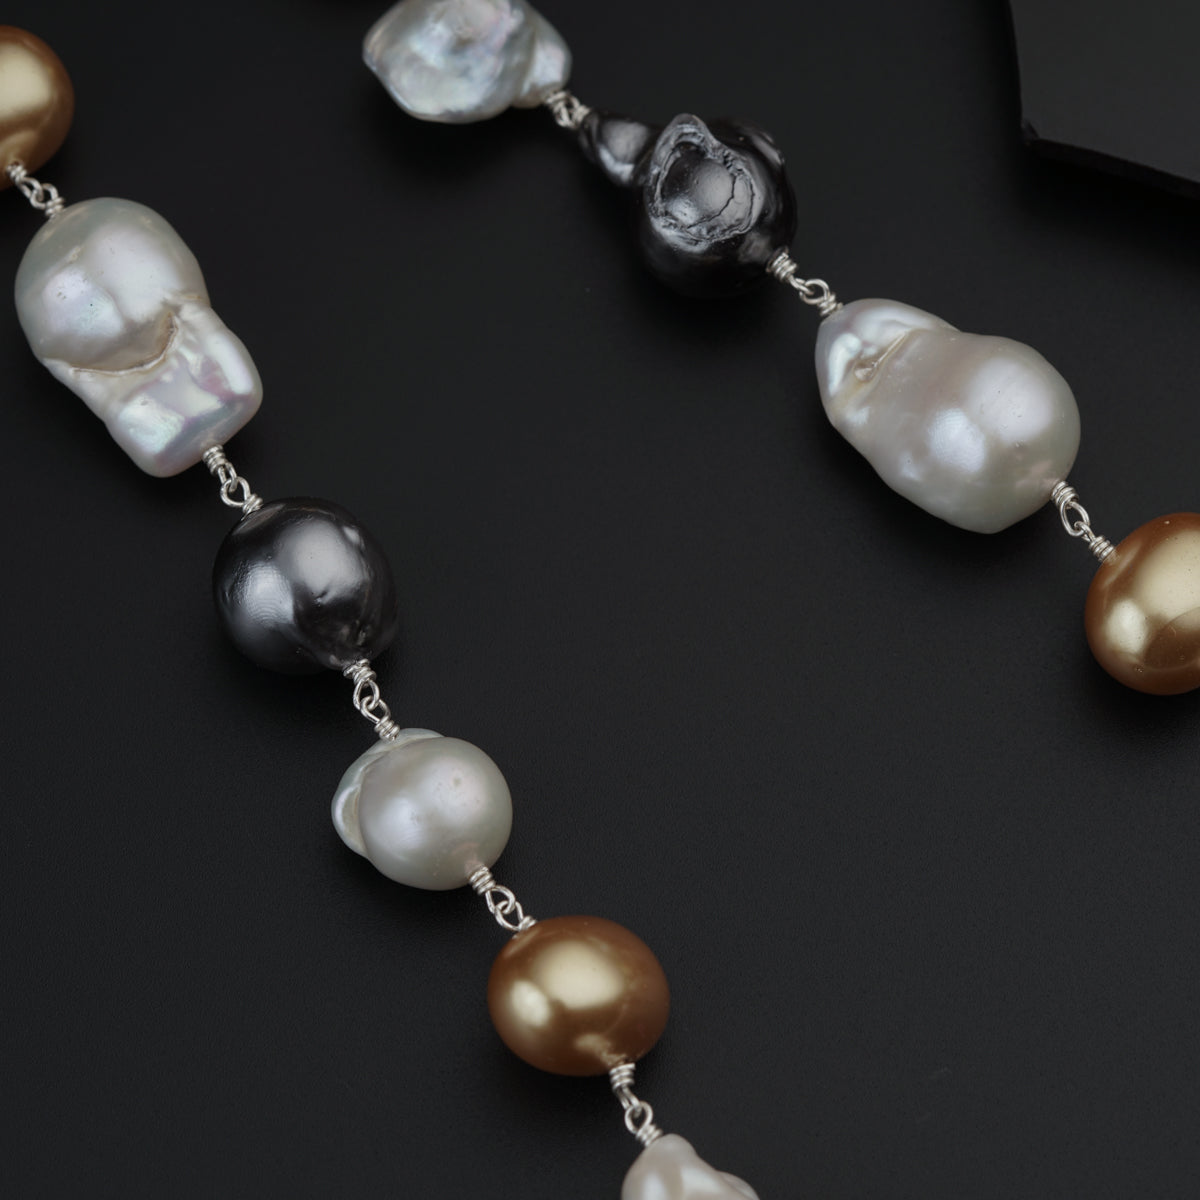 a long necklace with pearls on a black surface